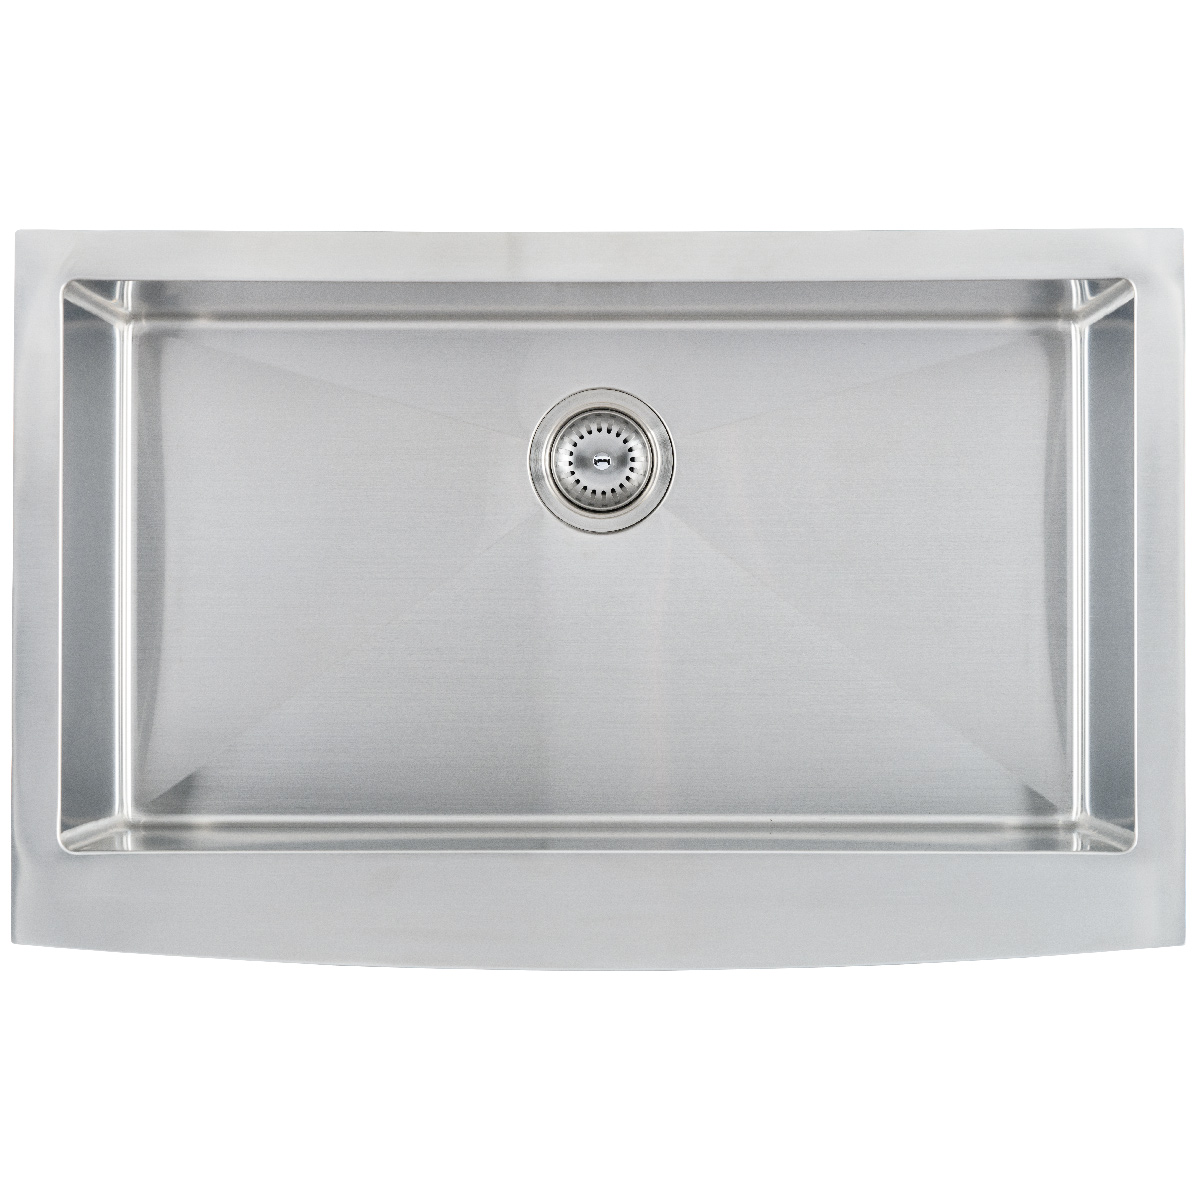 Single Bowl Handcrafted Farmhouse with Apron 3321 stainless steel kitchen sink Detail